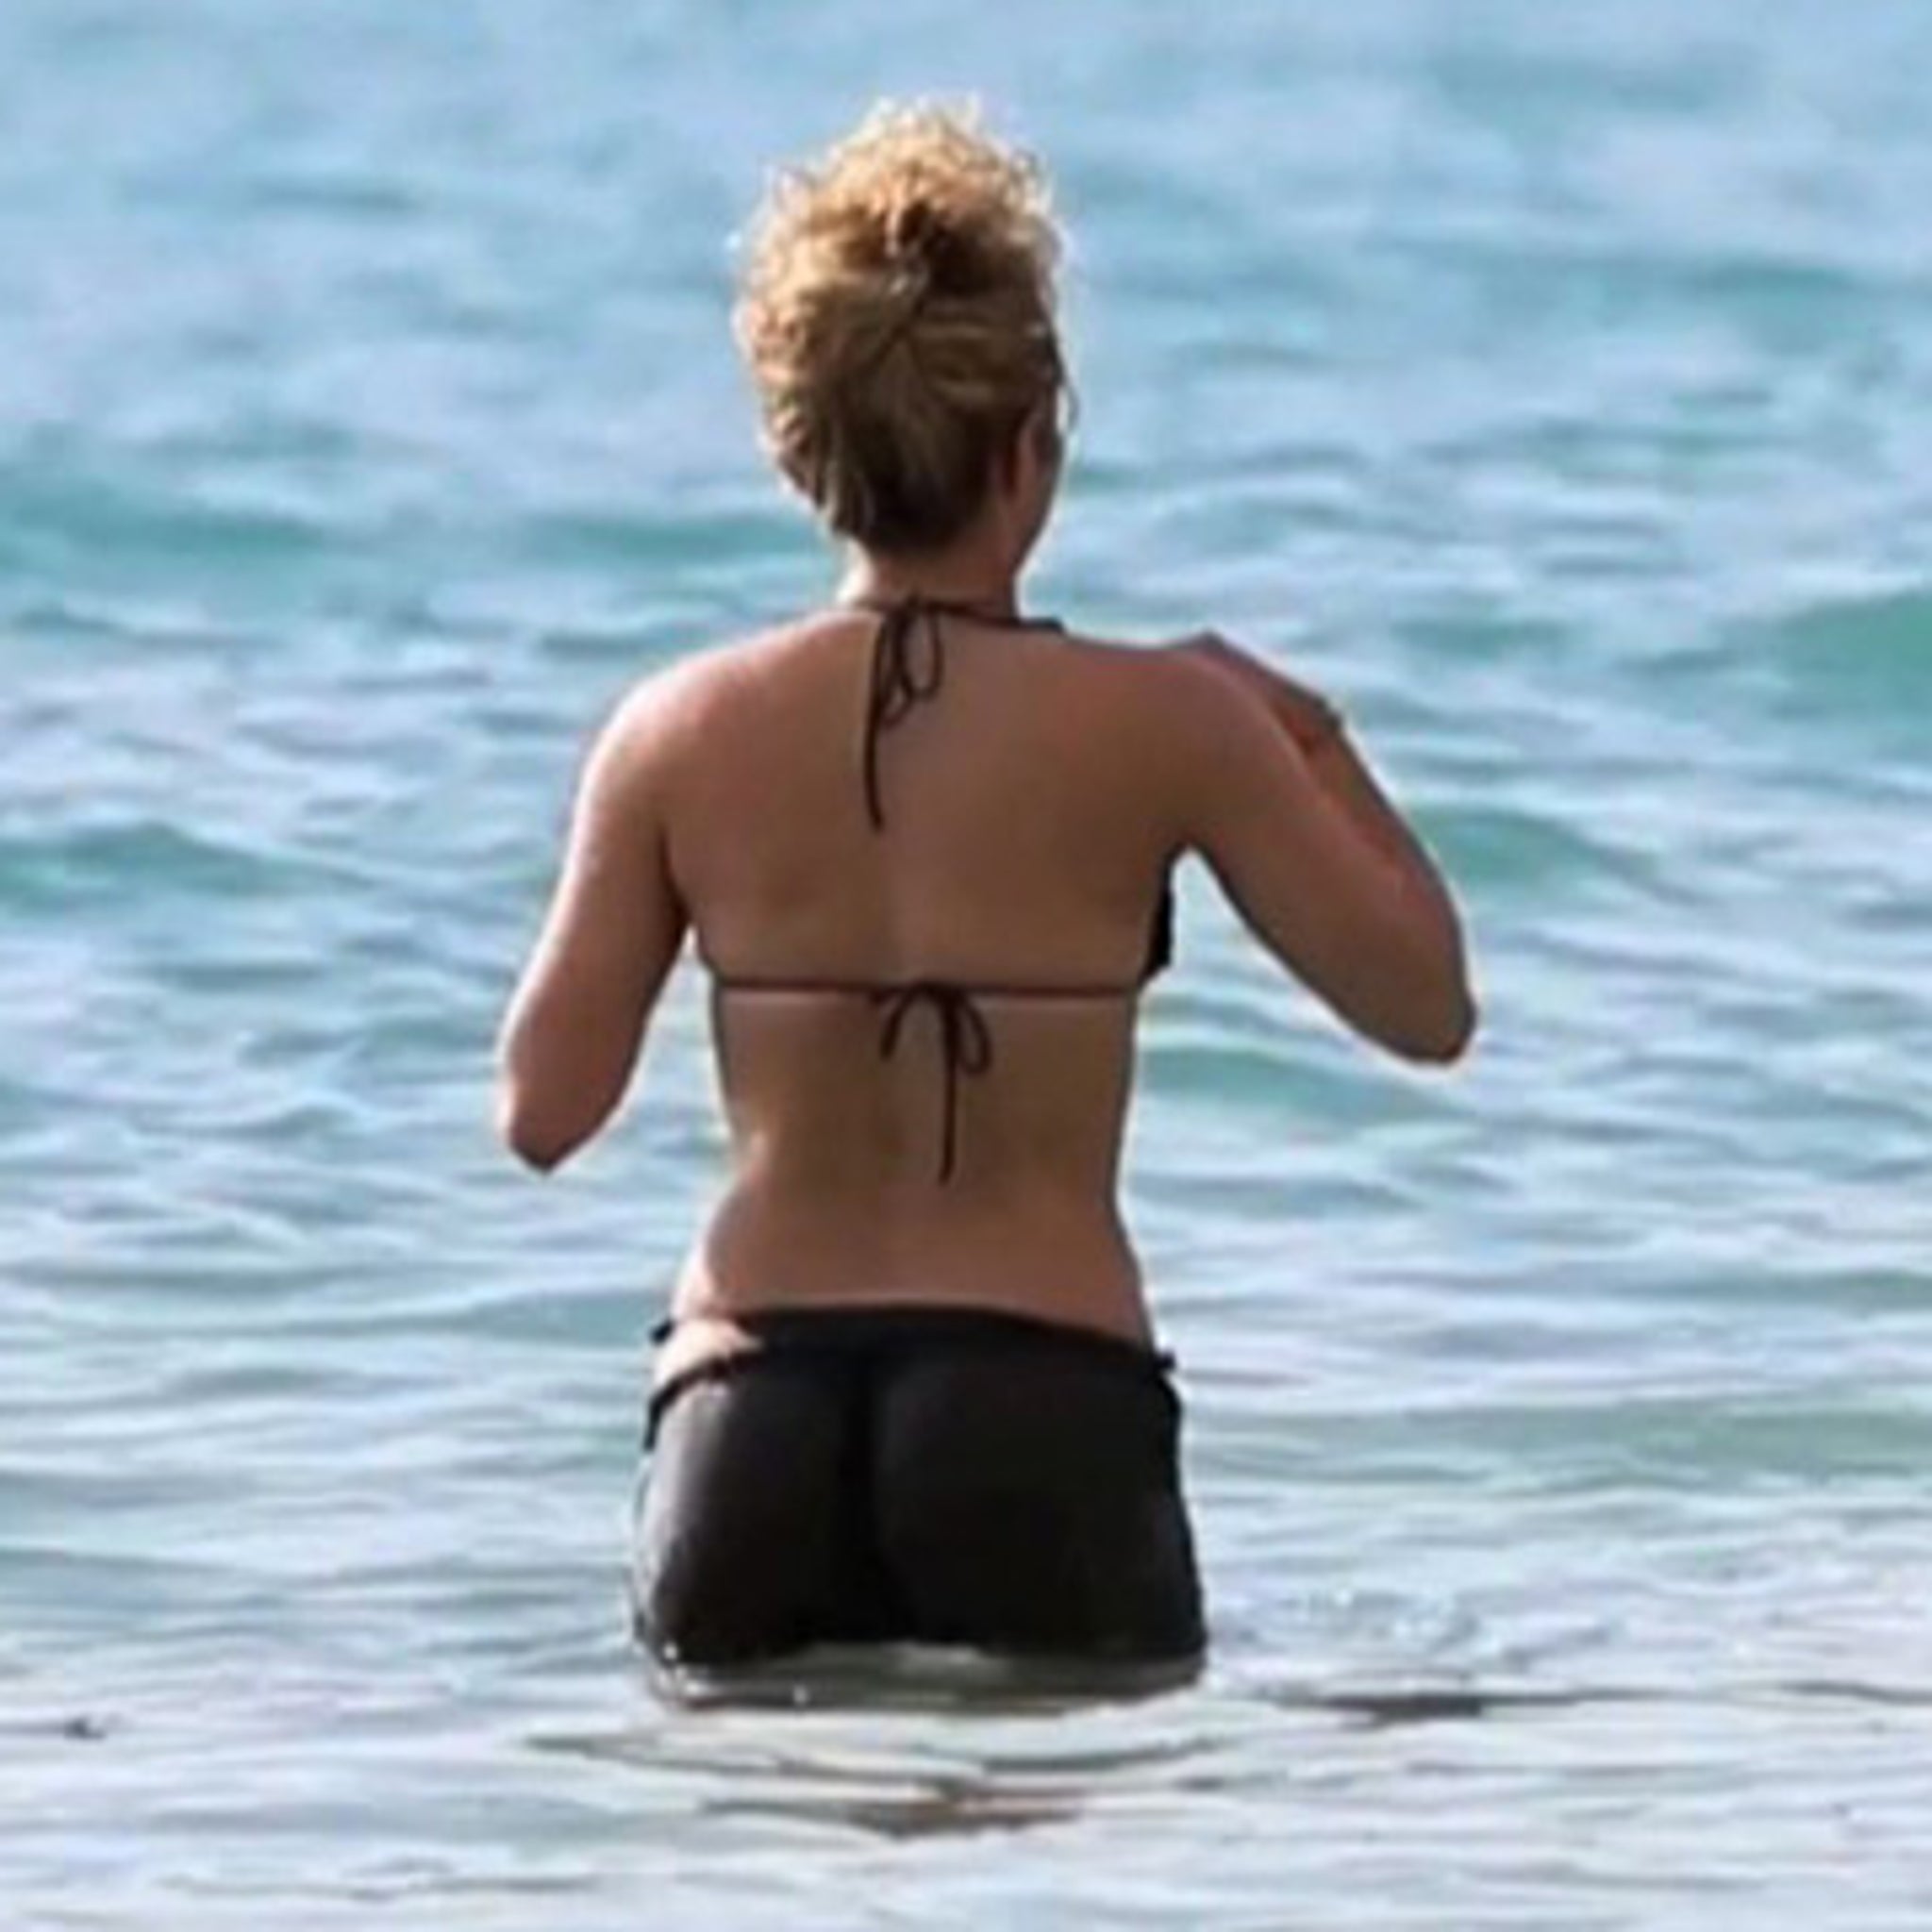 awesome Big ass at the beach 2022